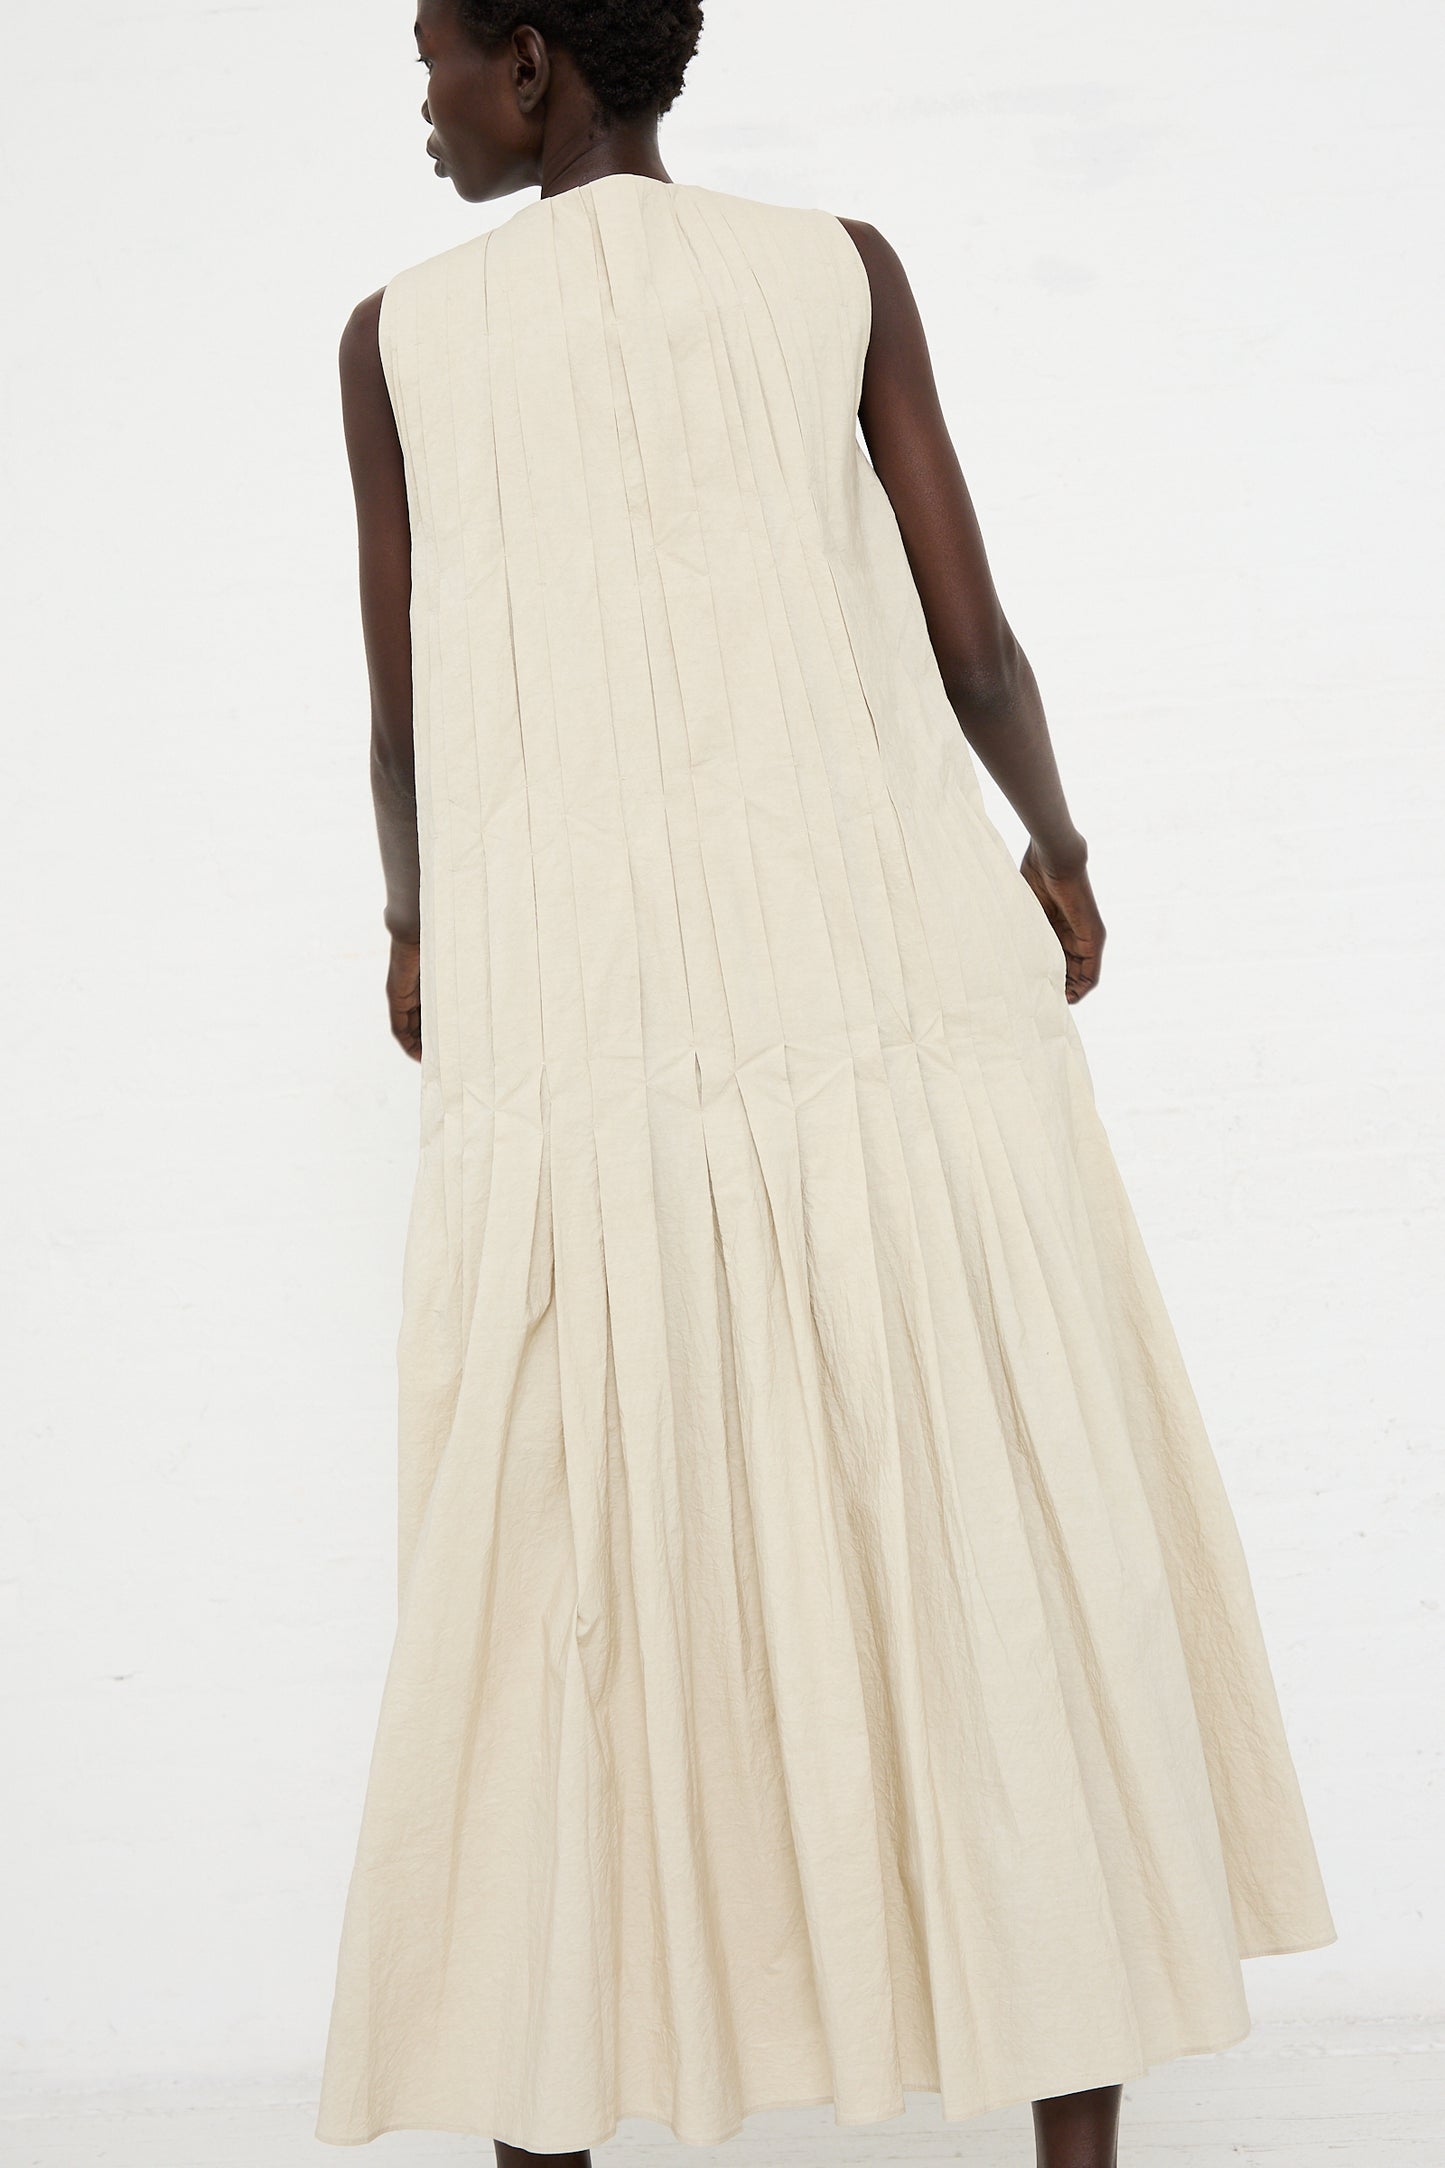 A person is facing away from the camera, wearing a Hand Pleat Dress in Greige by Lauren Manoogian made of a hand dyed cotton/linen blend fabric that extends to their ankles. The background is a plain white wall.